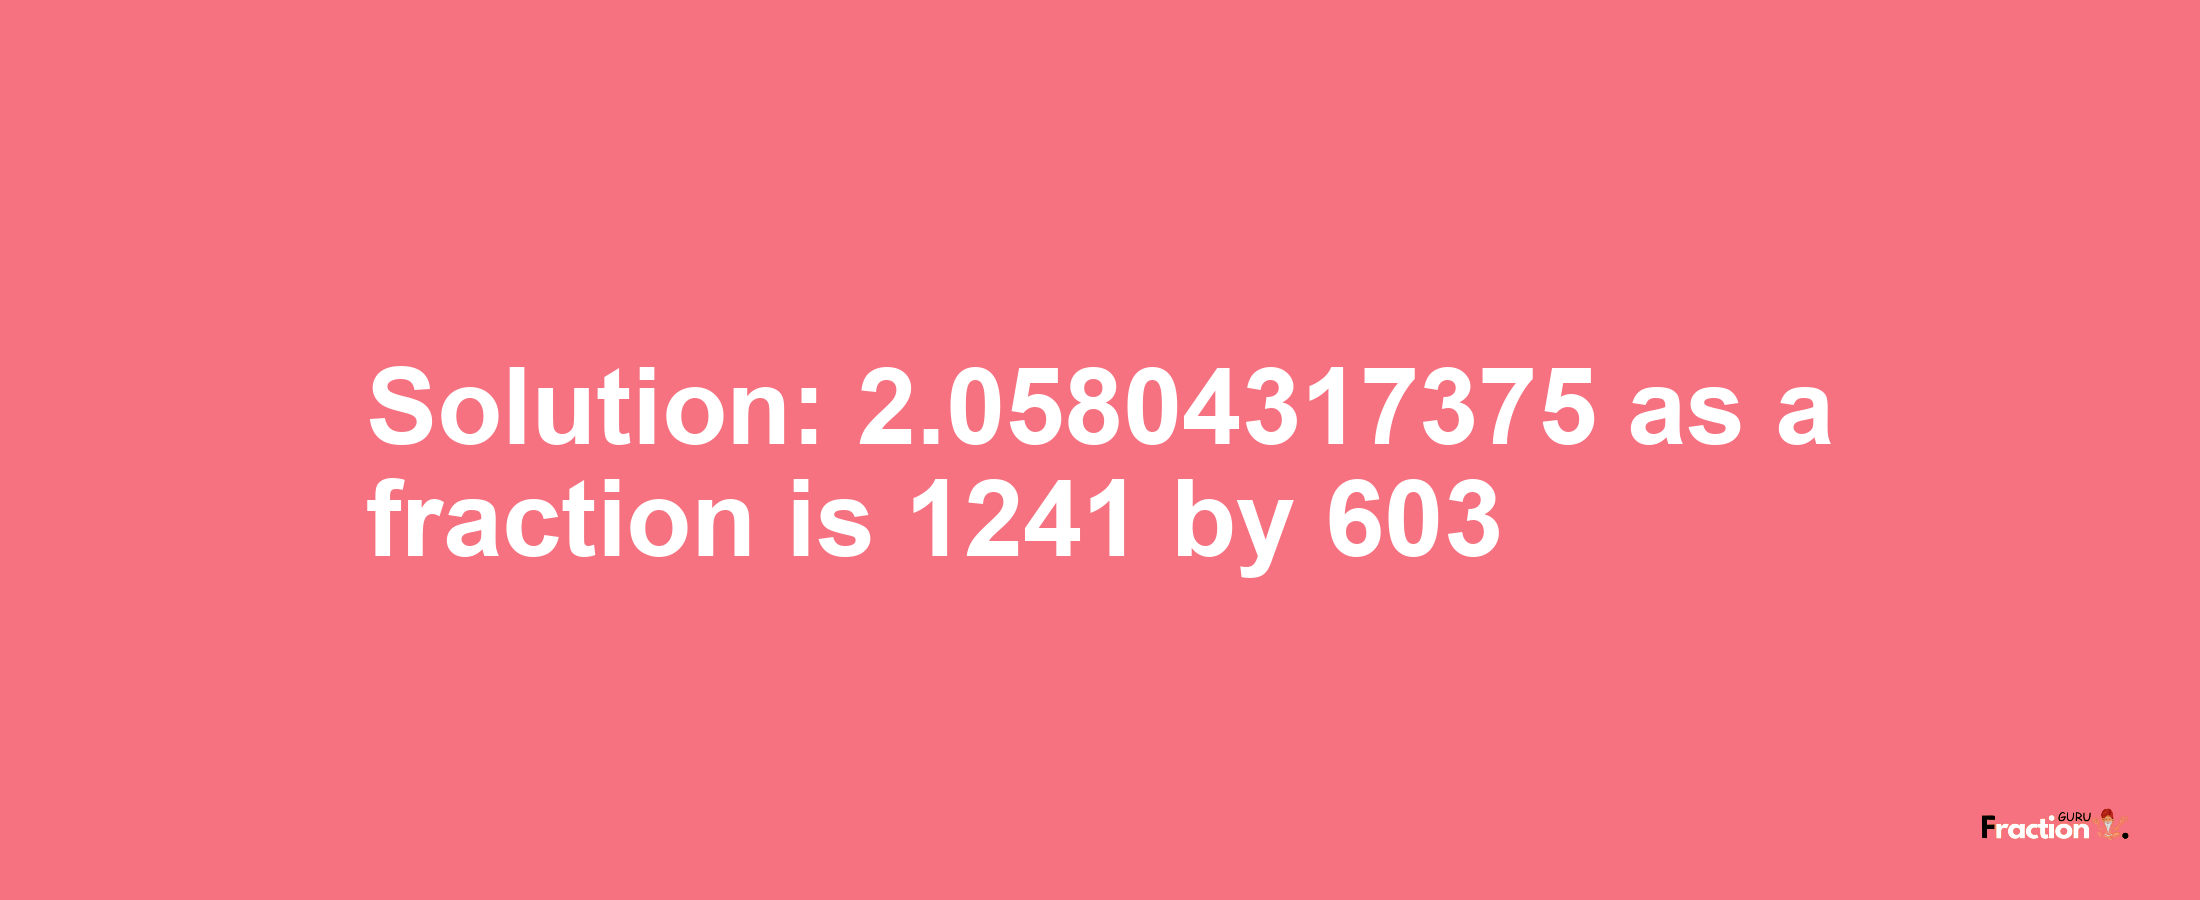 Solution:2.05804317375 as a fraction is 1241/603